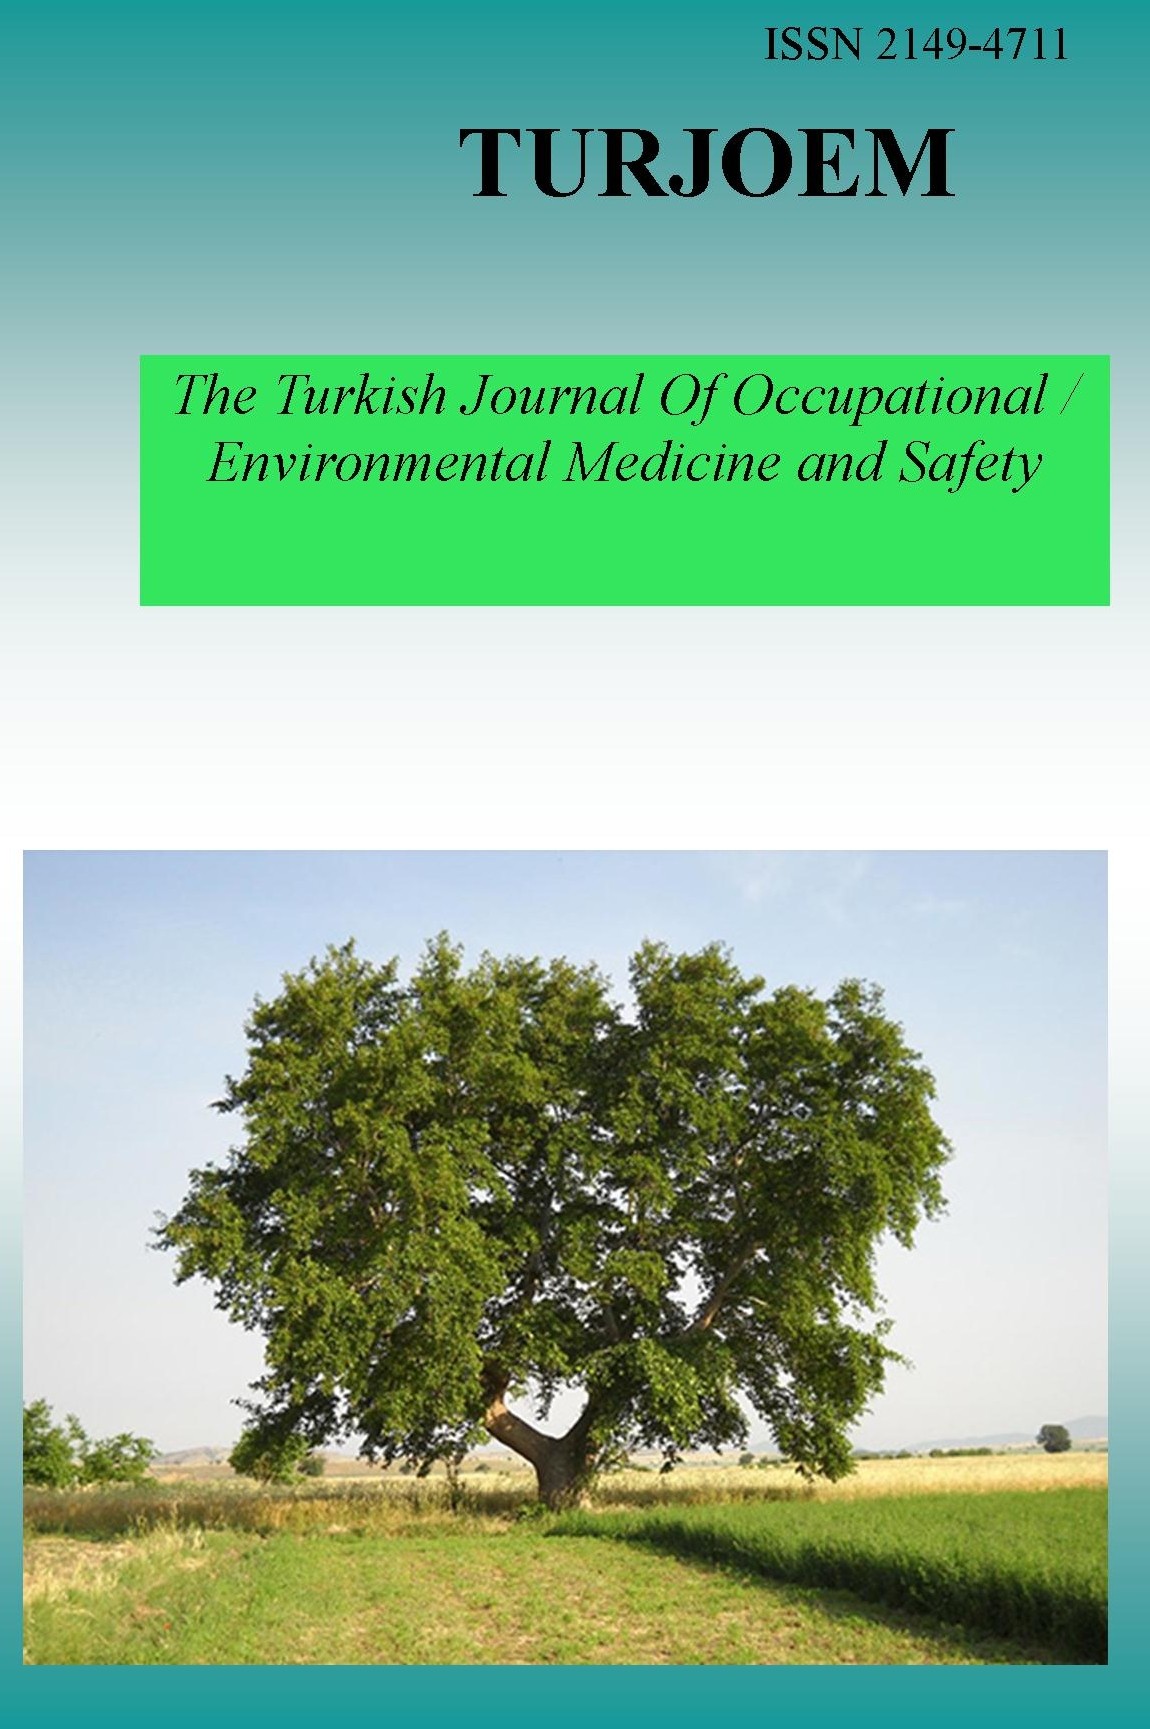 The Turkish Journal Of Occupational / Environmental Medicine and Safety